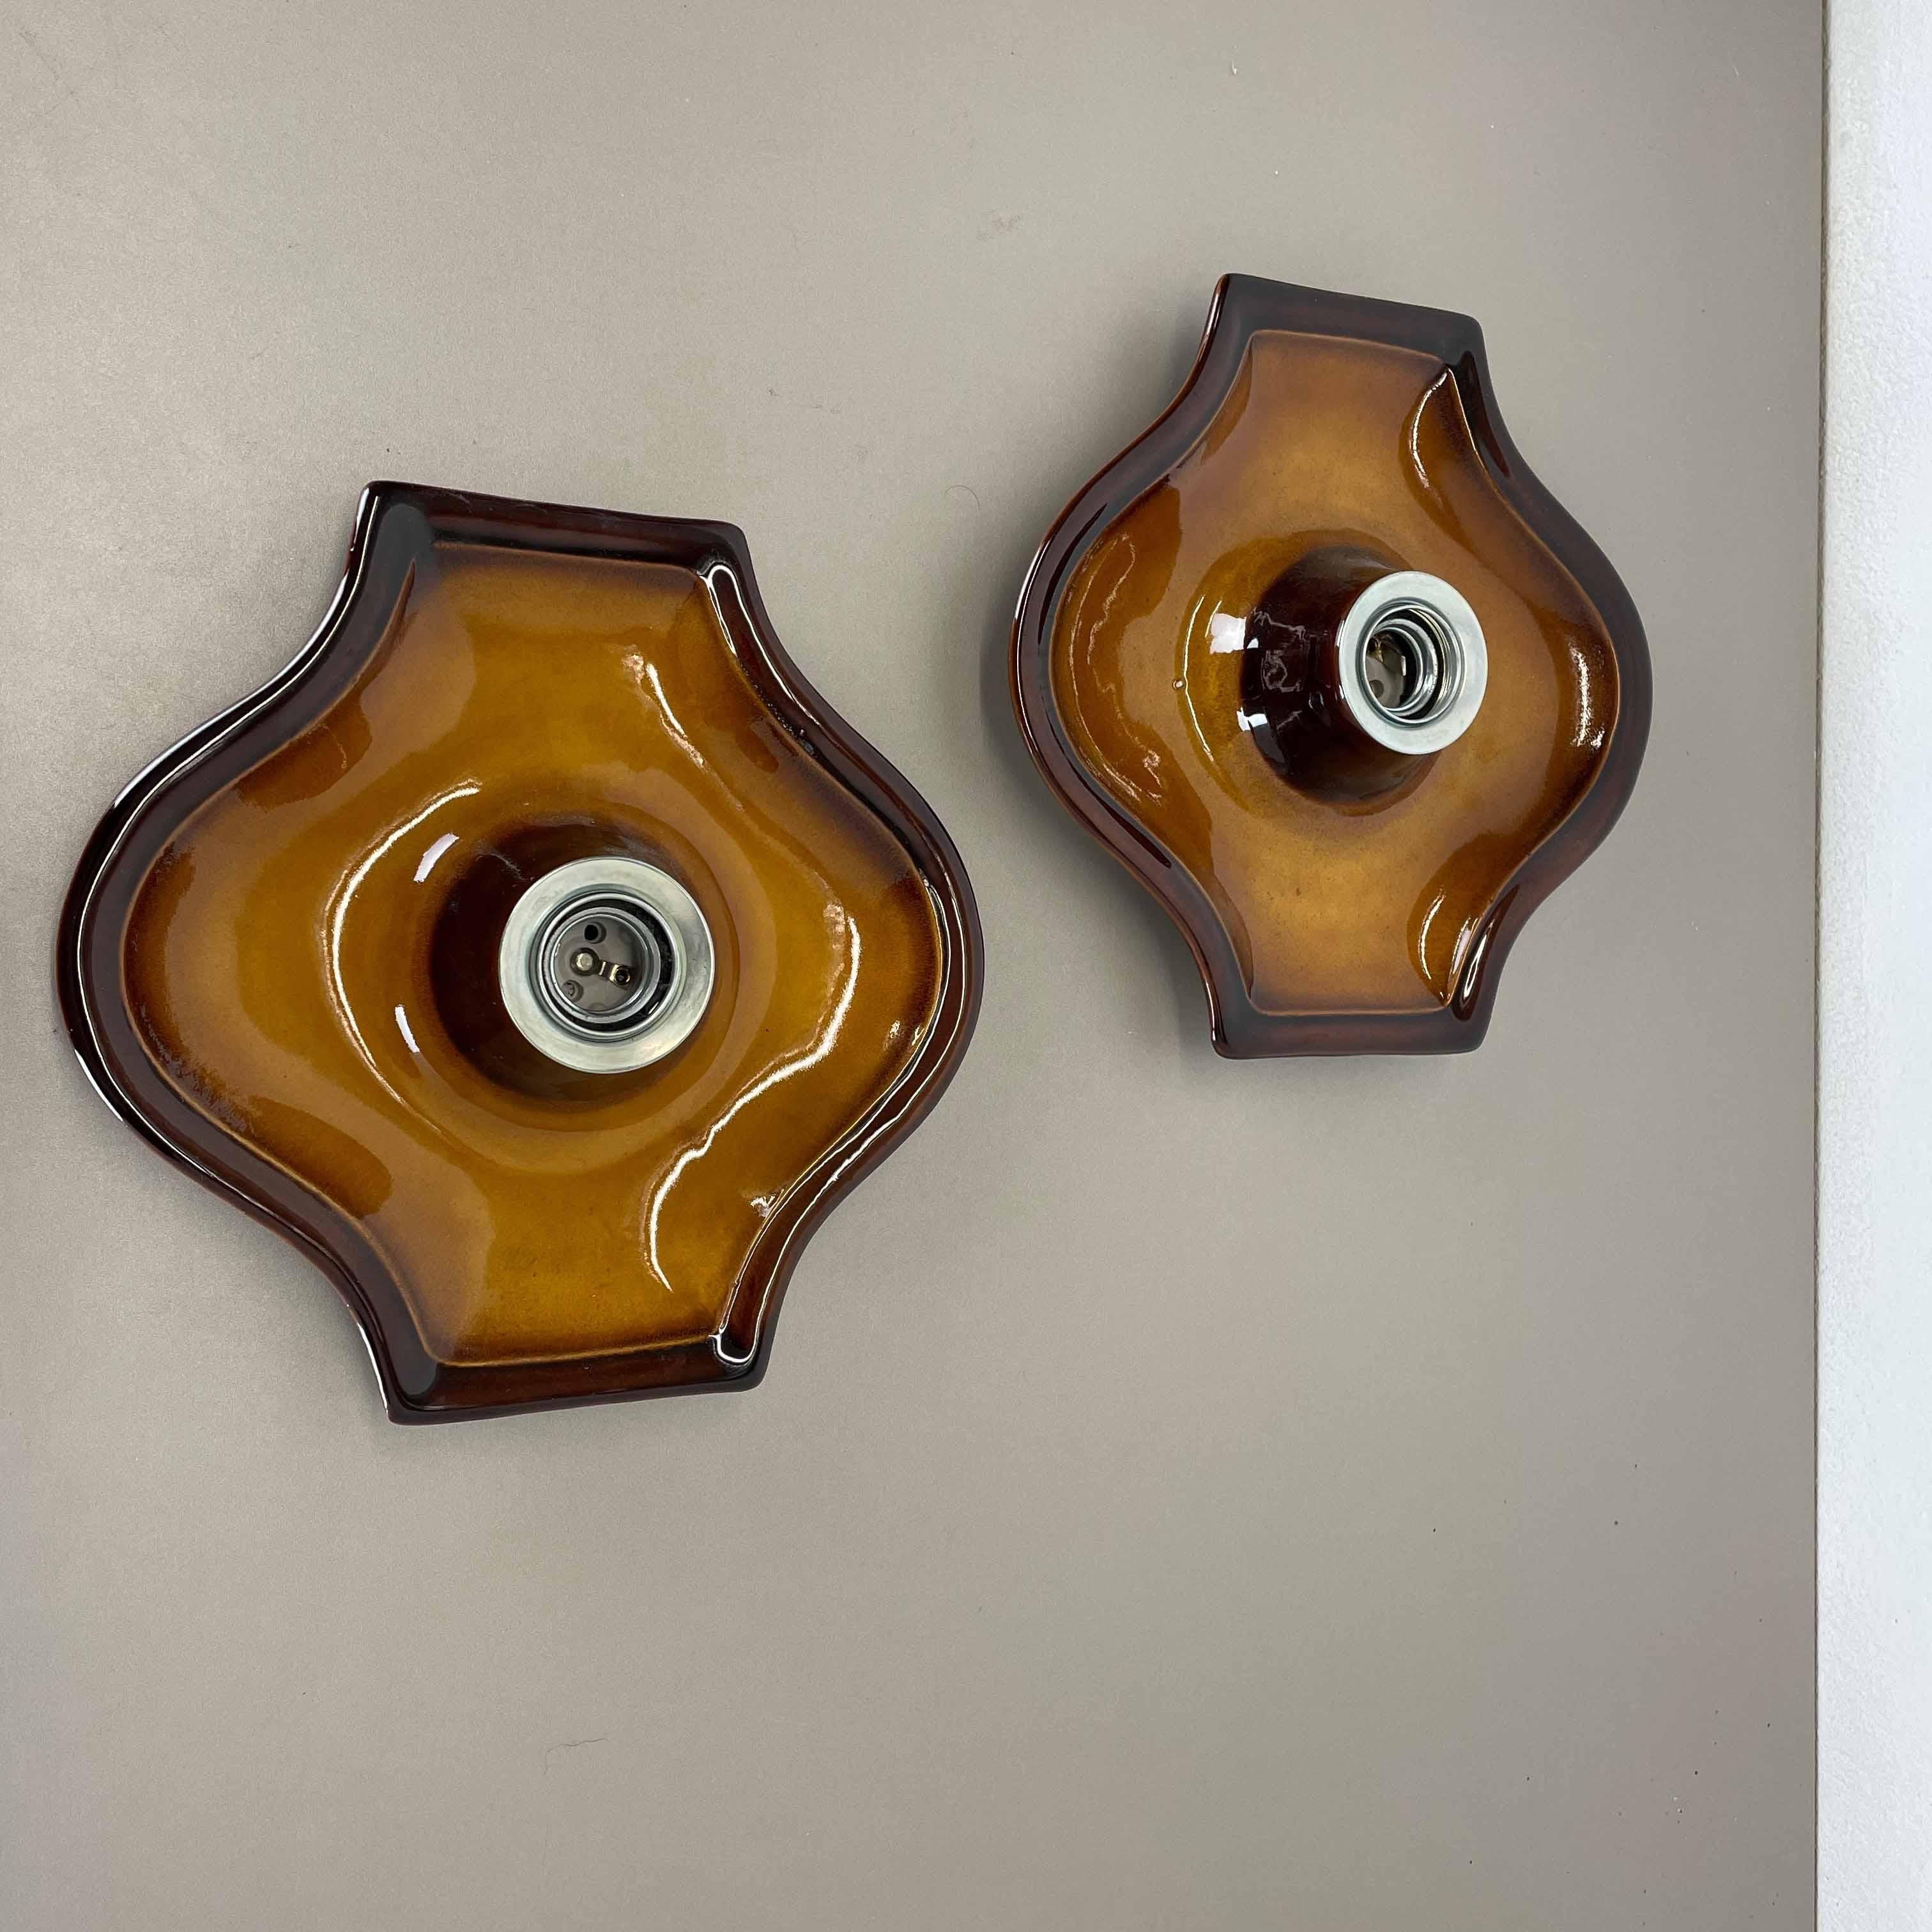 Article:

Wall light sconce set of two.


Producer:

Hustadt Lights, Germany.



Origin:

Germany.



Age:

1970s.



Description:

Original 1960s modernist German wall light made of ceramic in fat lava optic. This super